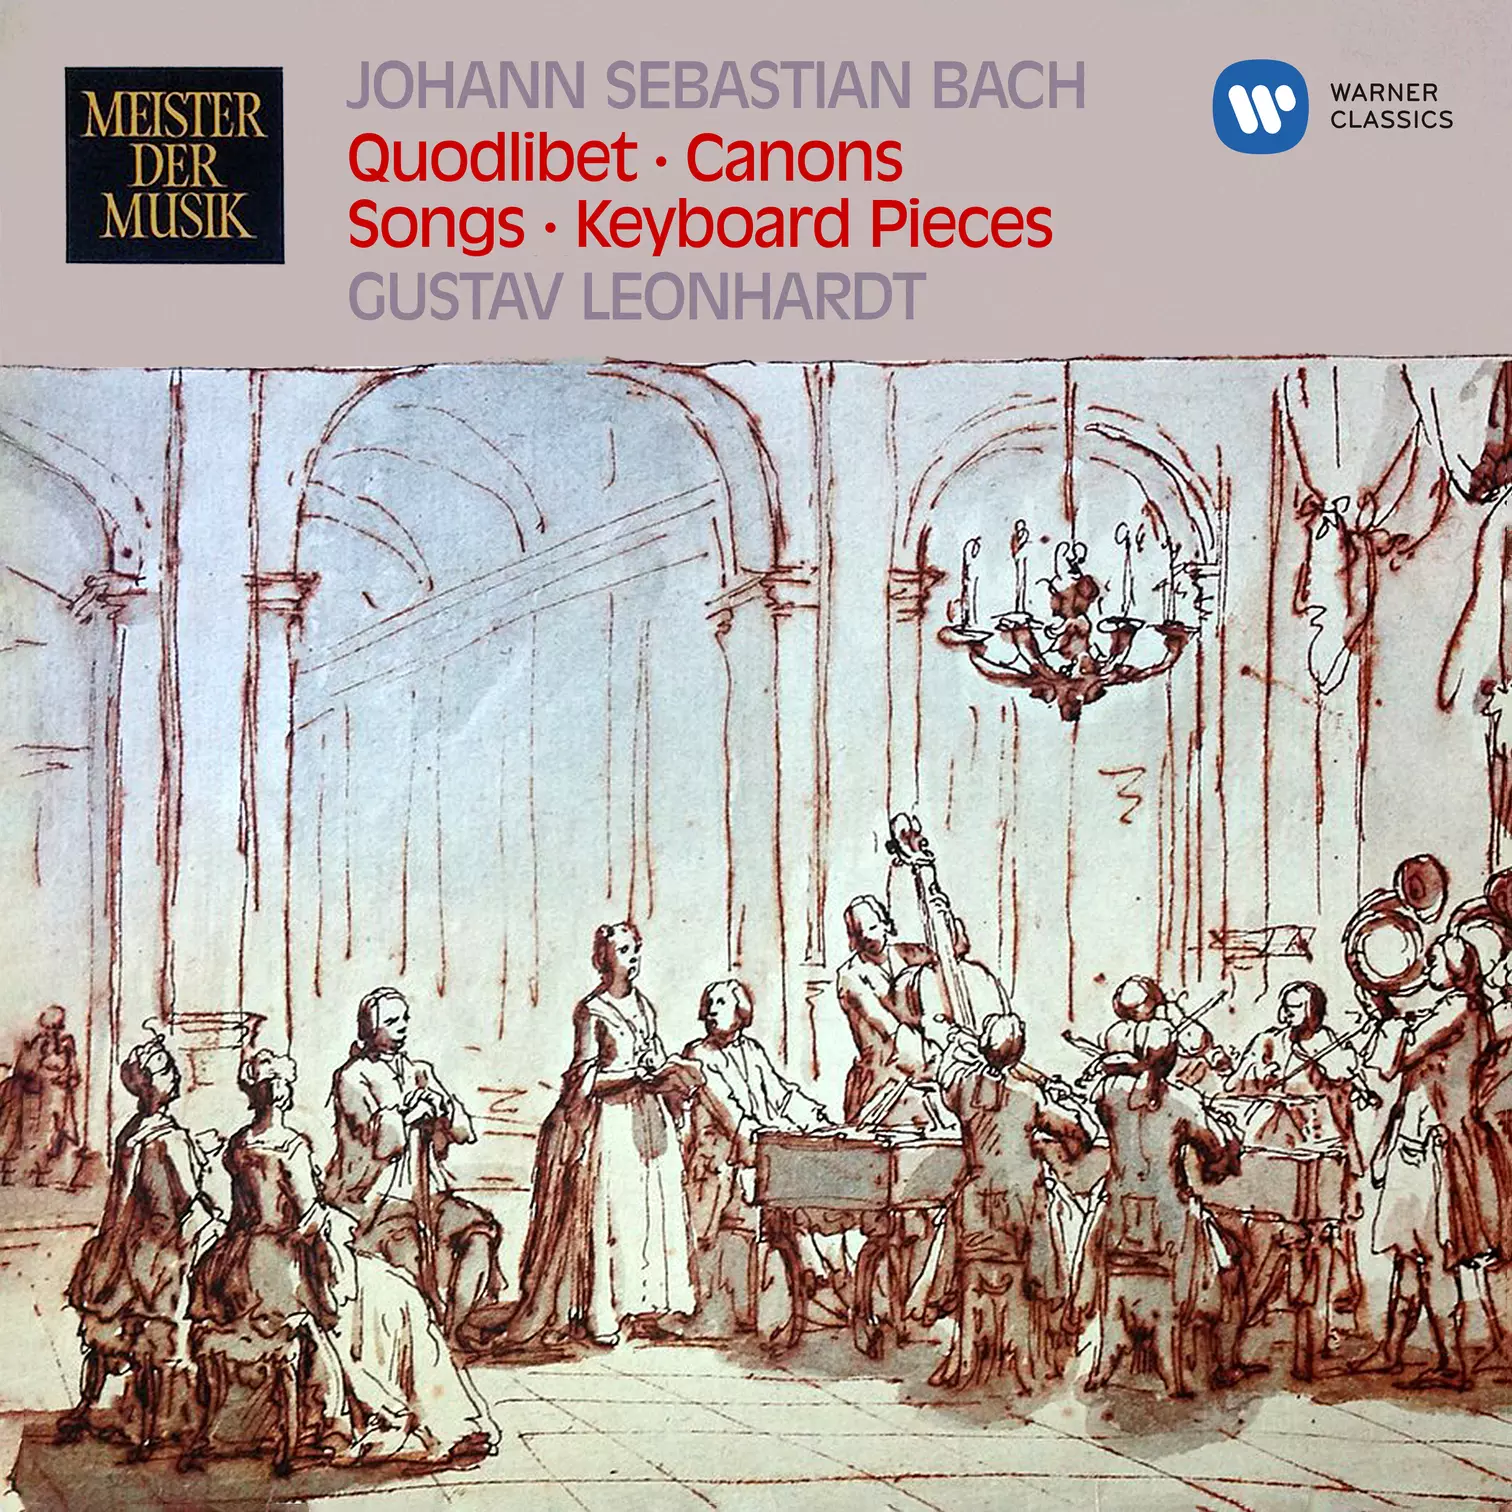 Quodlibet, Canons, Songs, Chorales & Keyboard Pieces